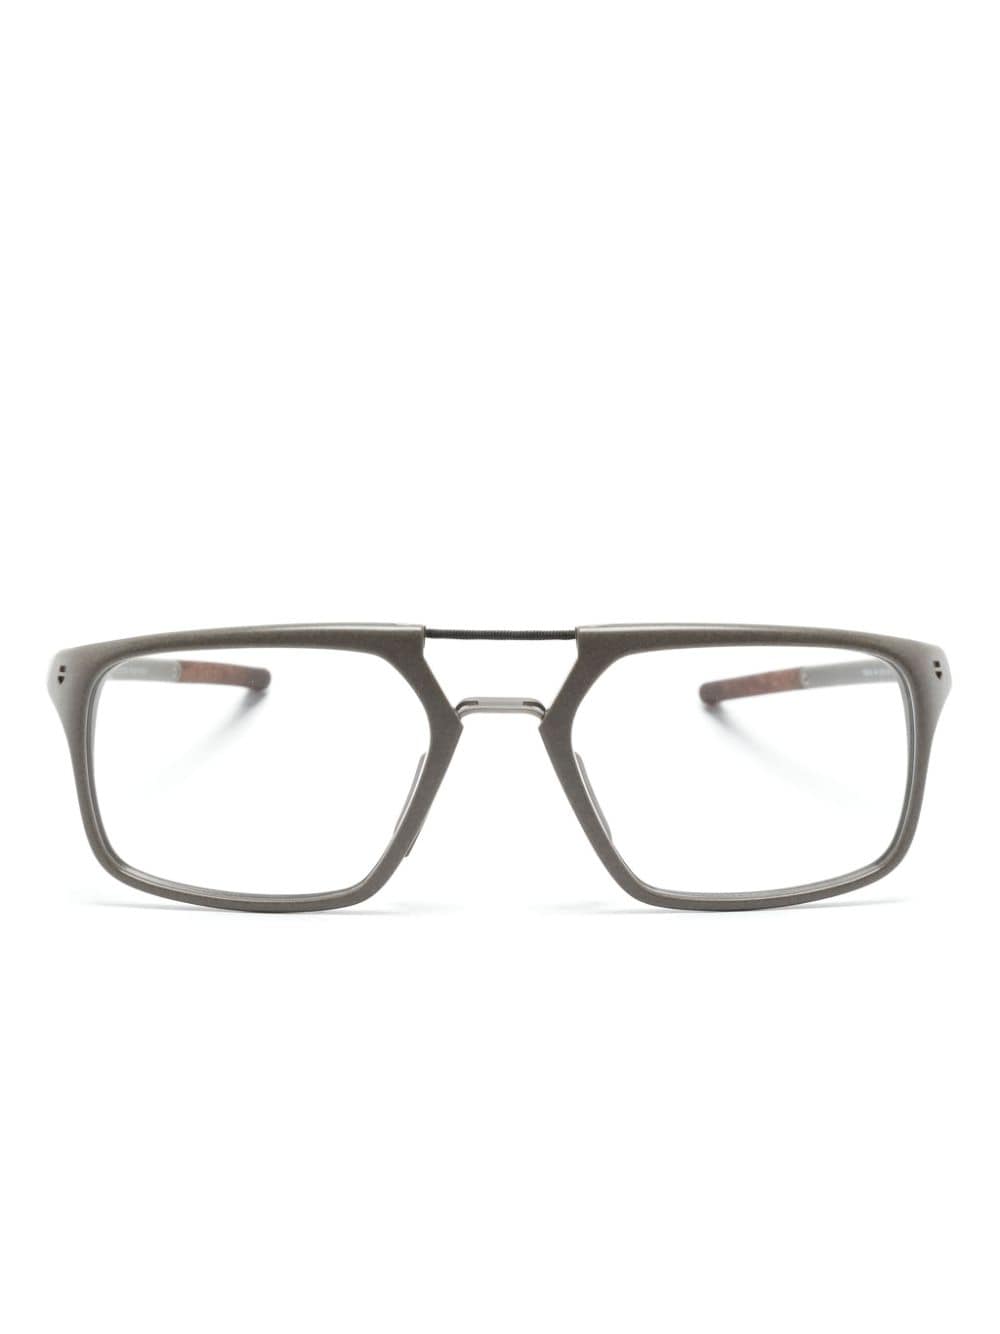 TAG HEUER RECTANGLE-FRAME GLASSES